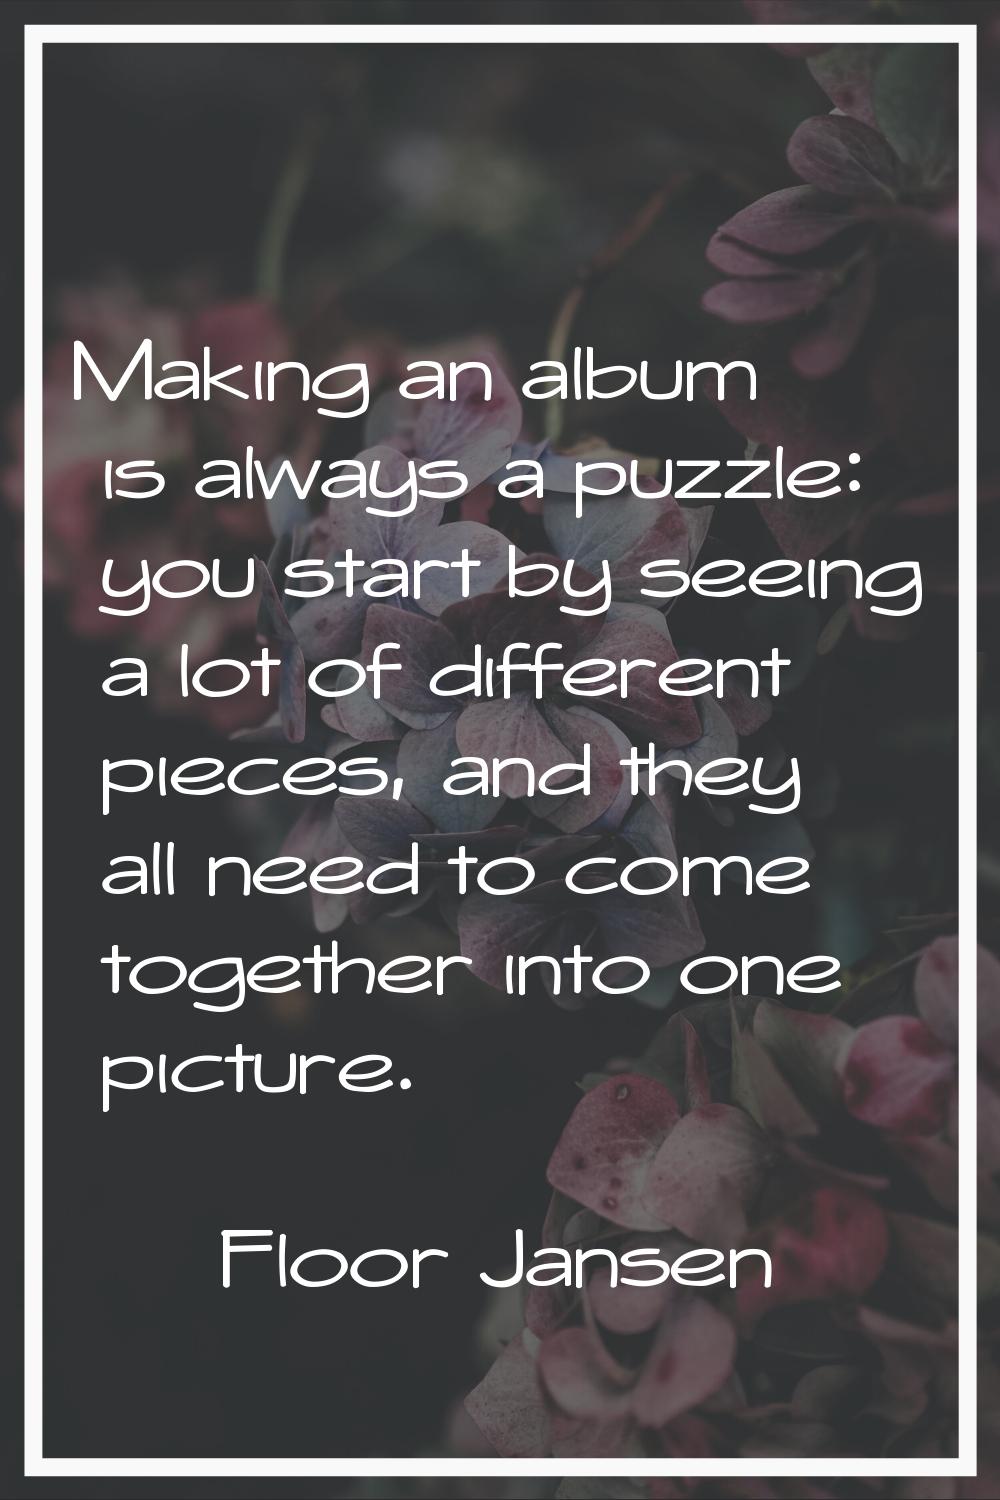 Making an album is always a puzzle: you start by seeing a lot of different pieces, and they all nee